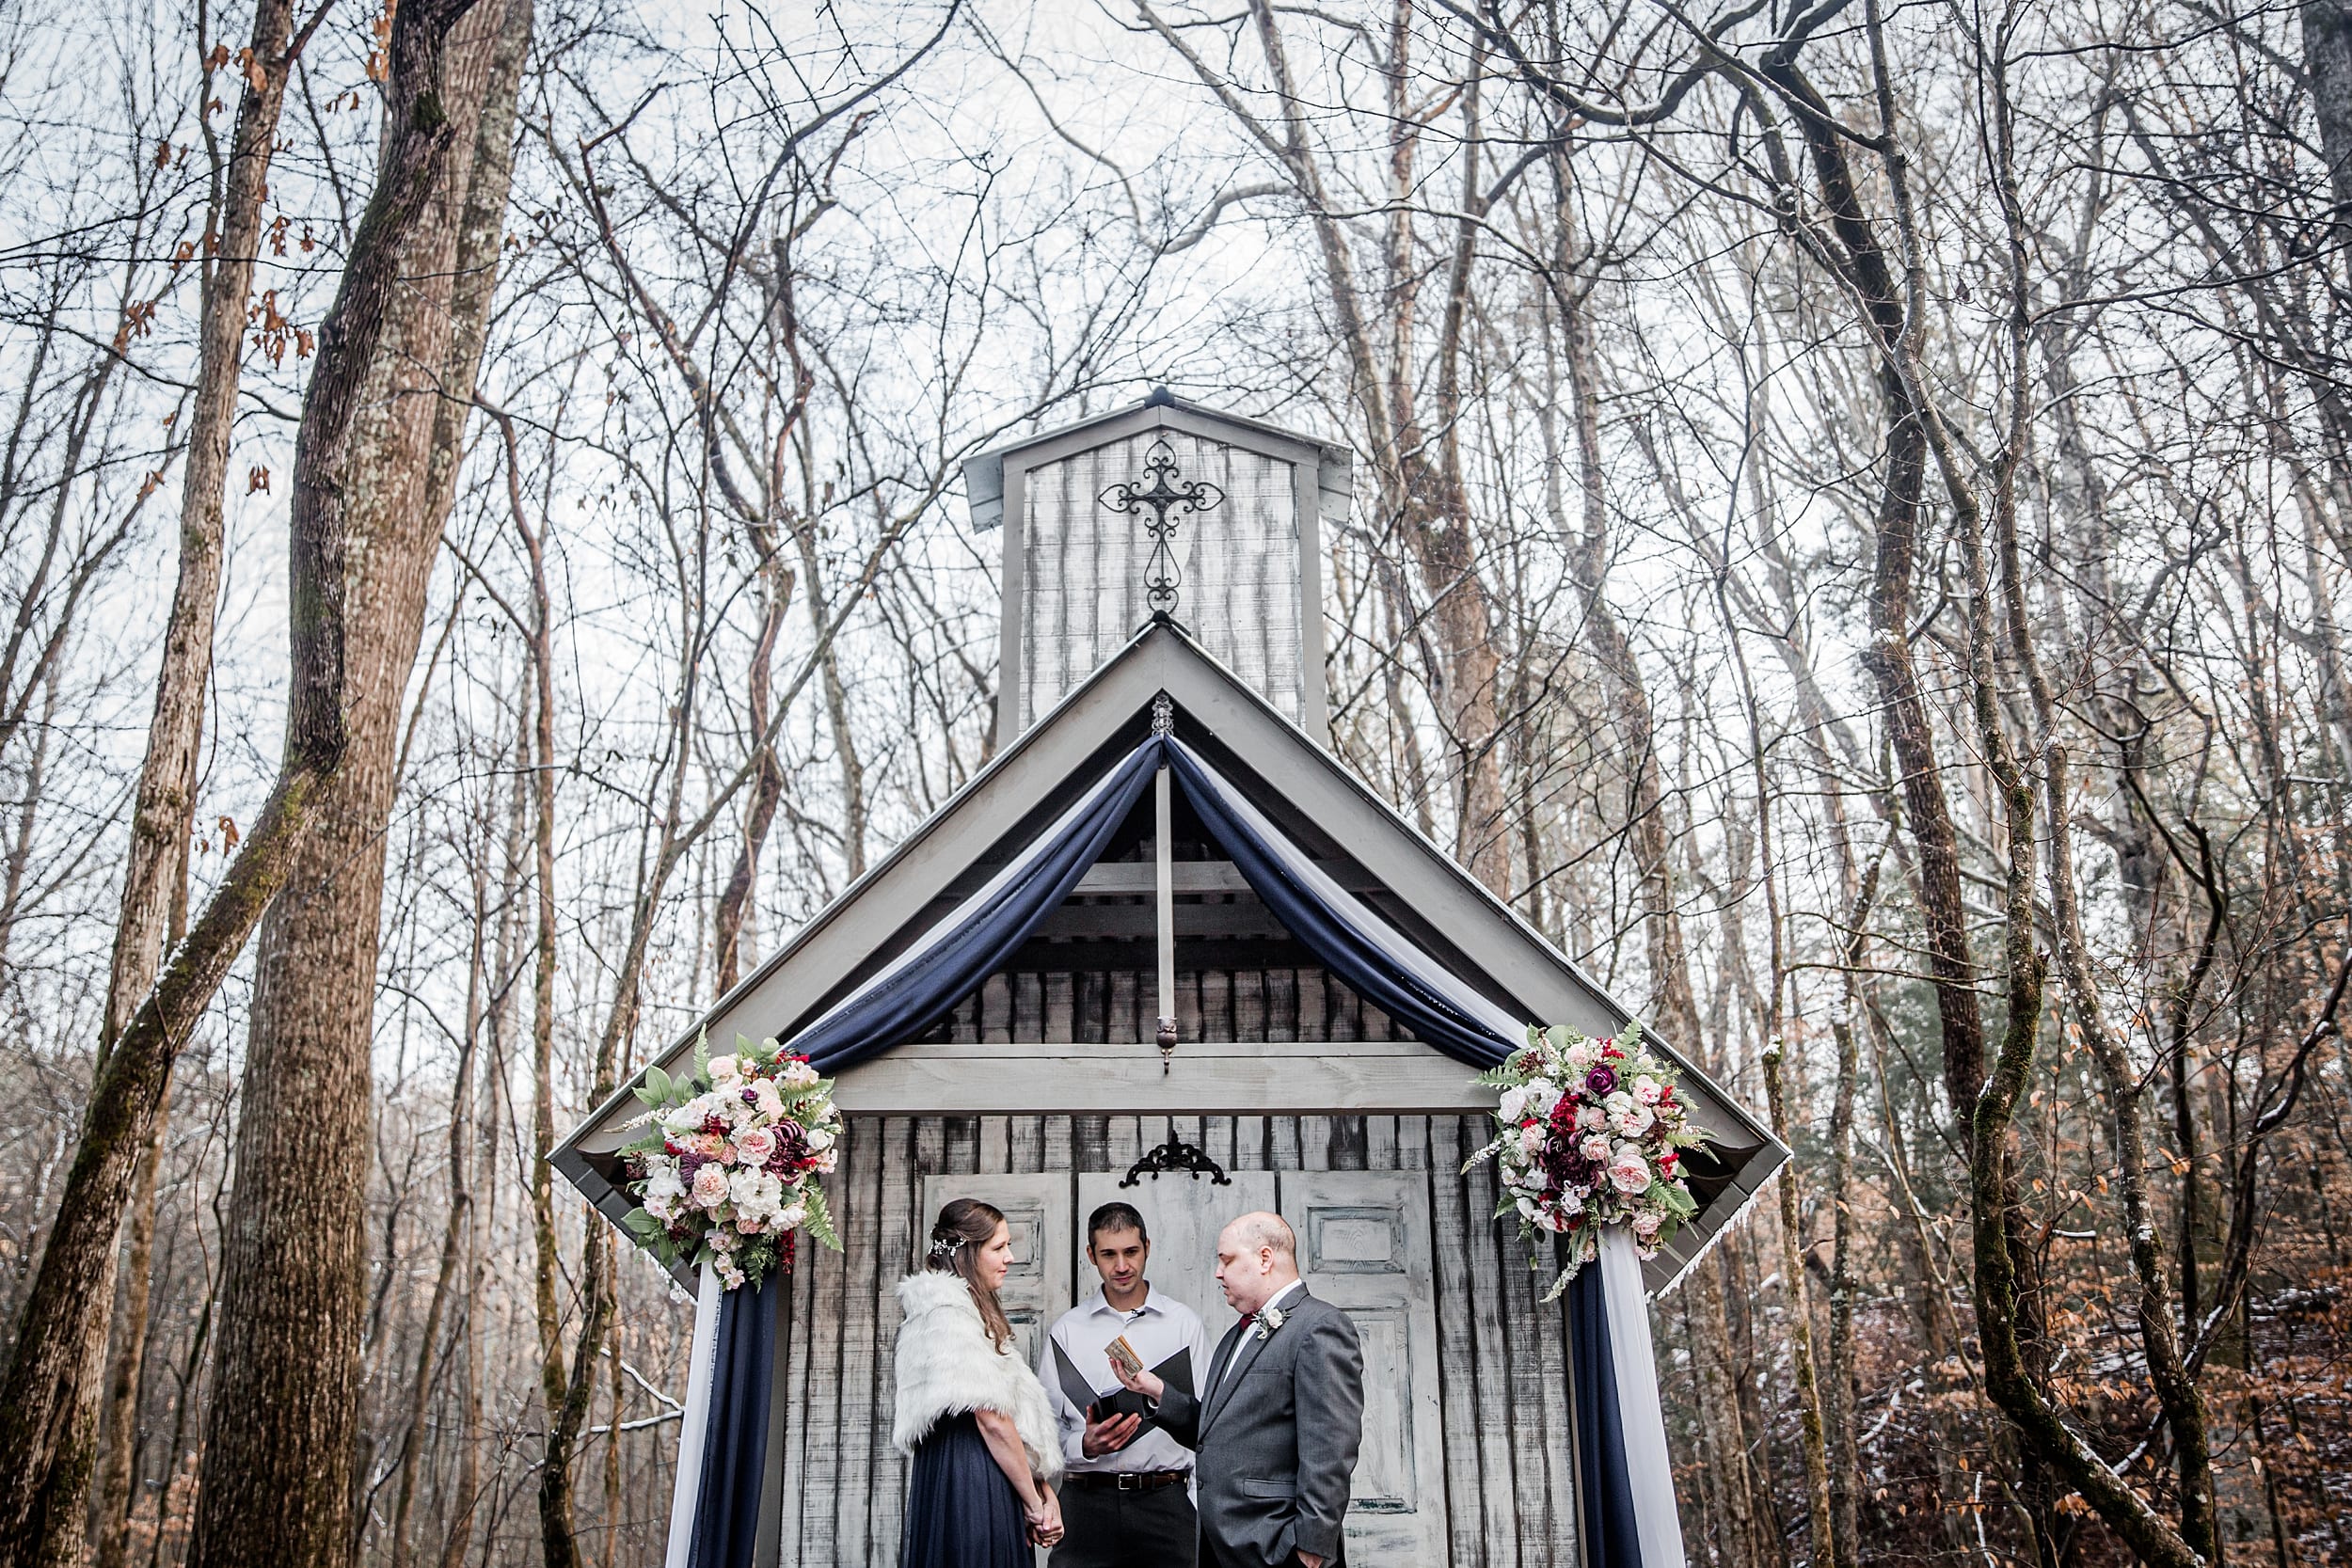 Smoky Mountain Vow Renewals Mini Wedding Chapel in the Woods